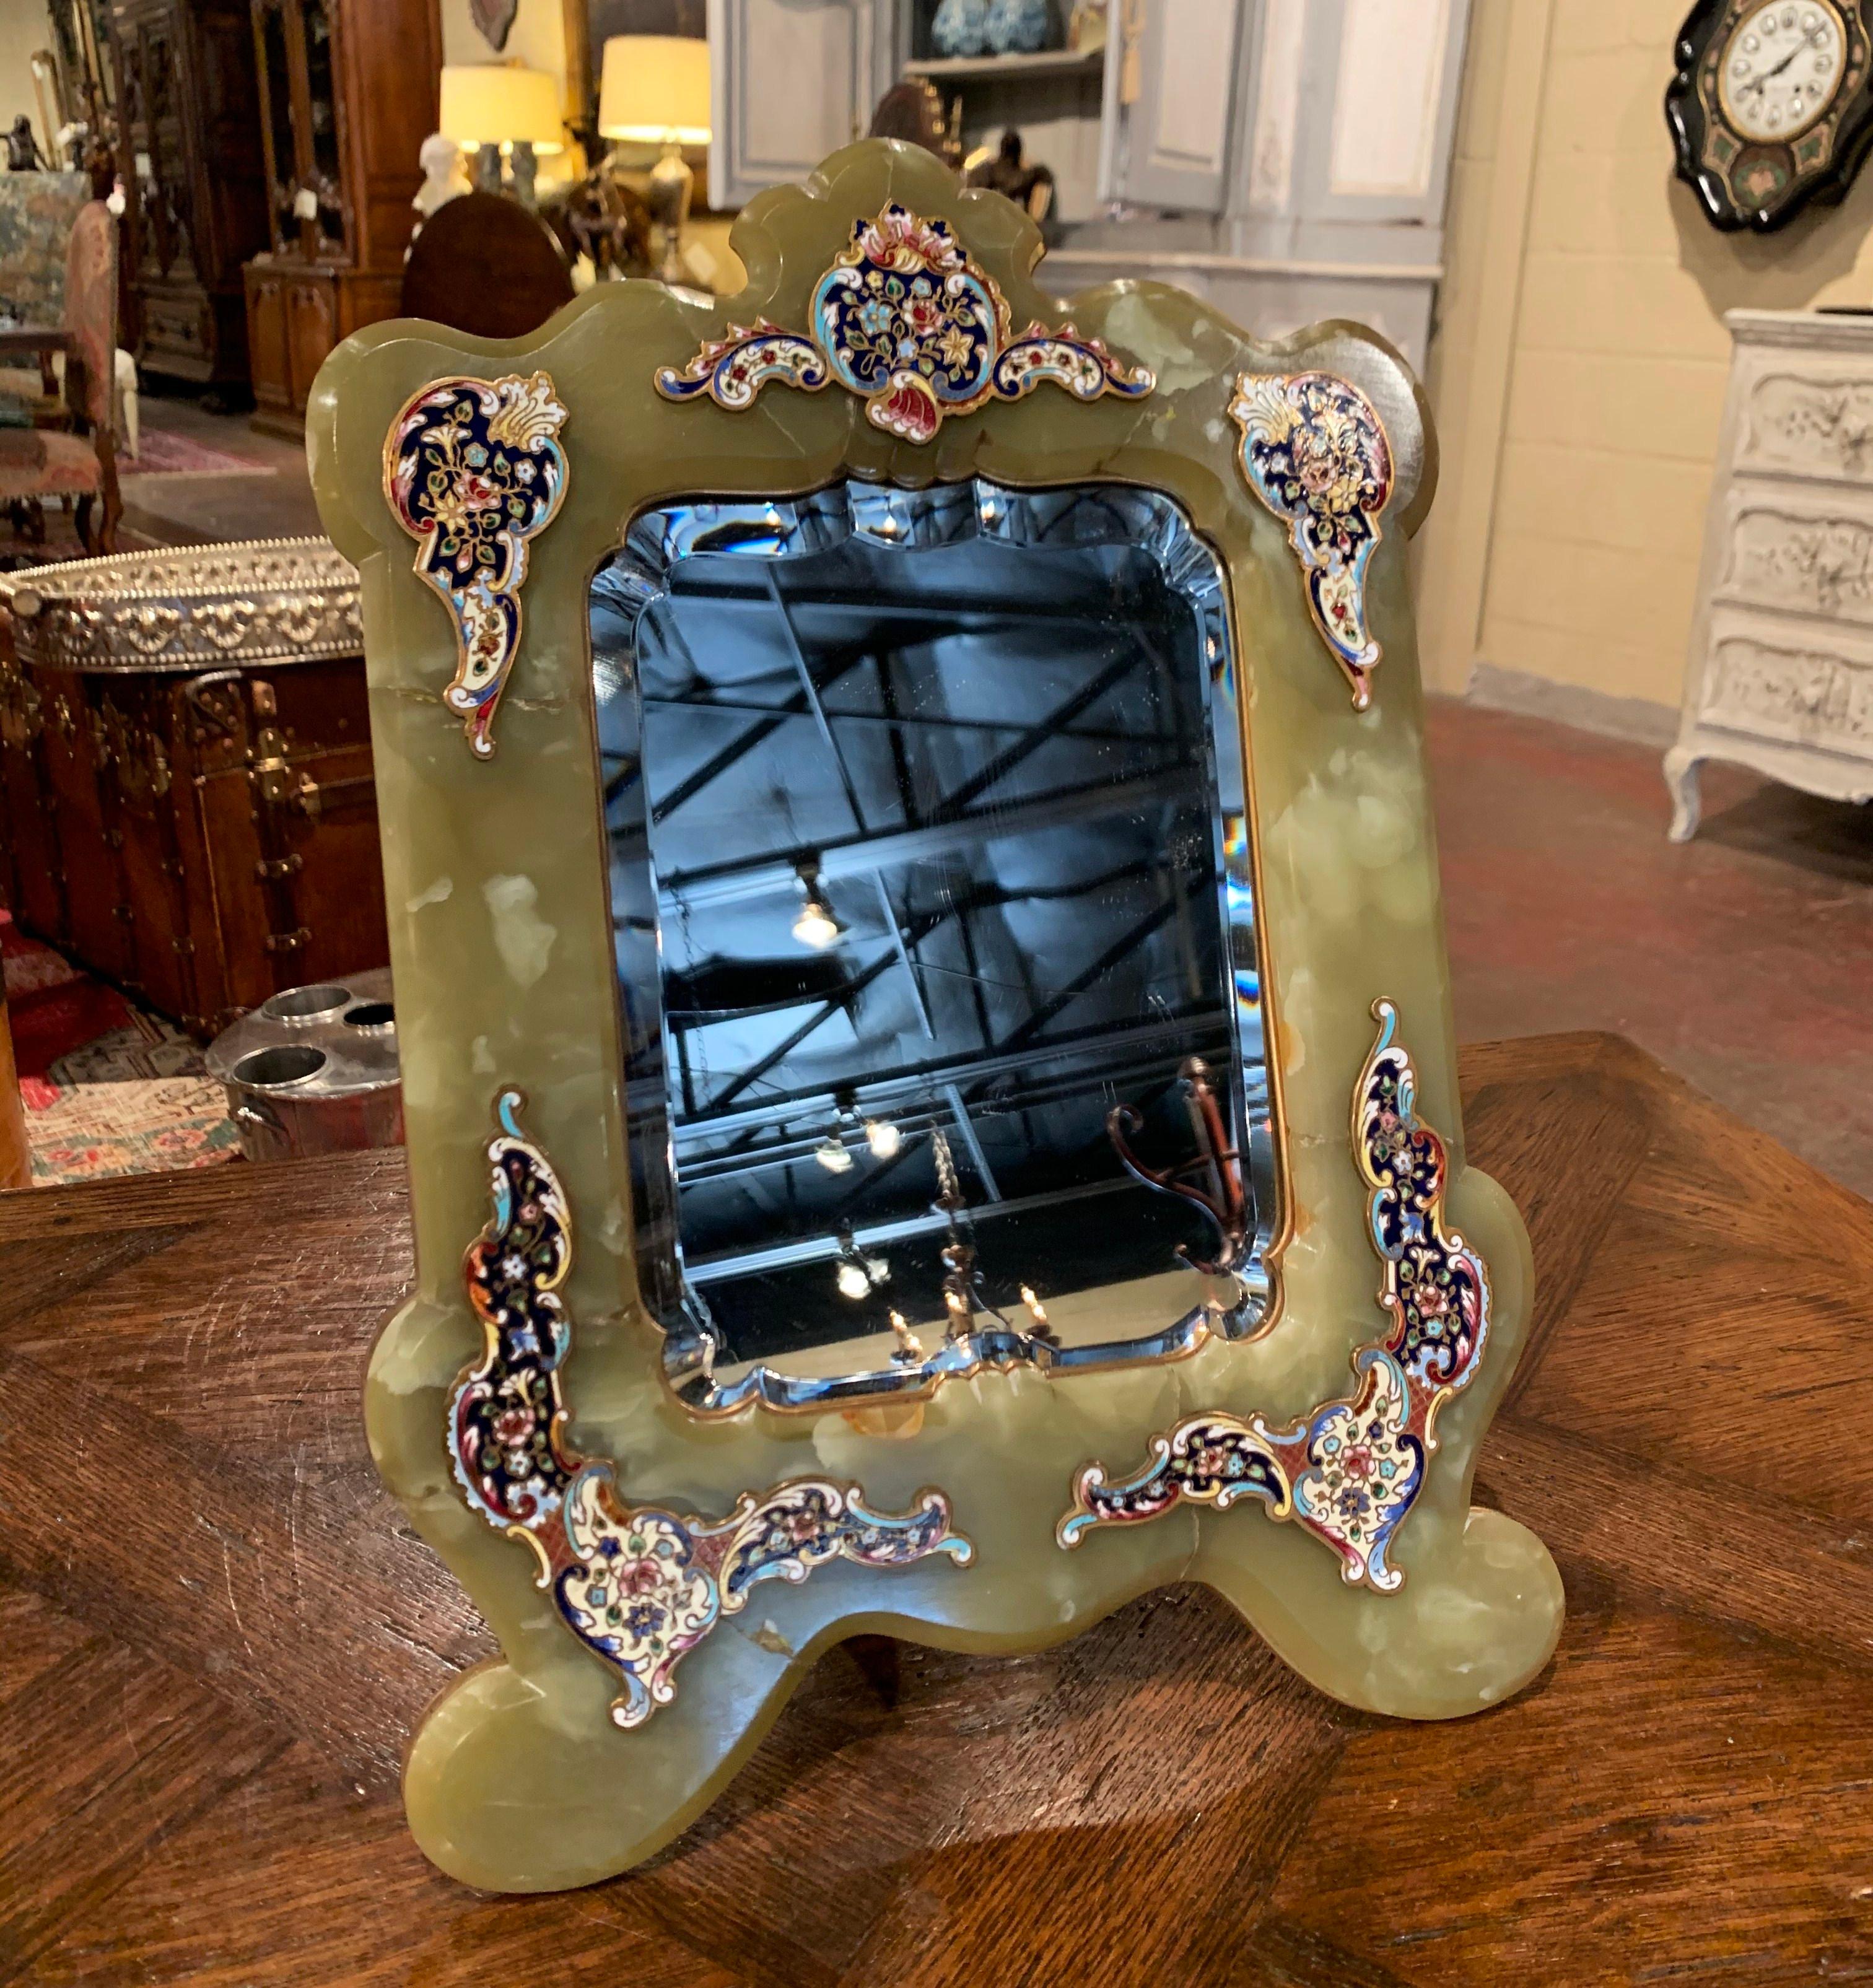 Decorate your master bath counter with this elegant antique dressing mirror. Crafted in France circa 1870, the freestanding table mirror with the original beveled mercury glass, features a centered ornate green marble decorated with cloisonné mounts